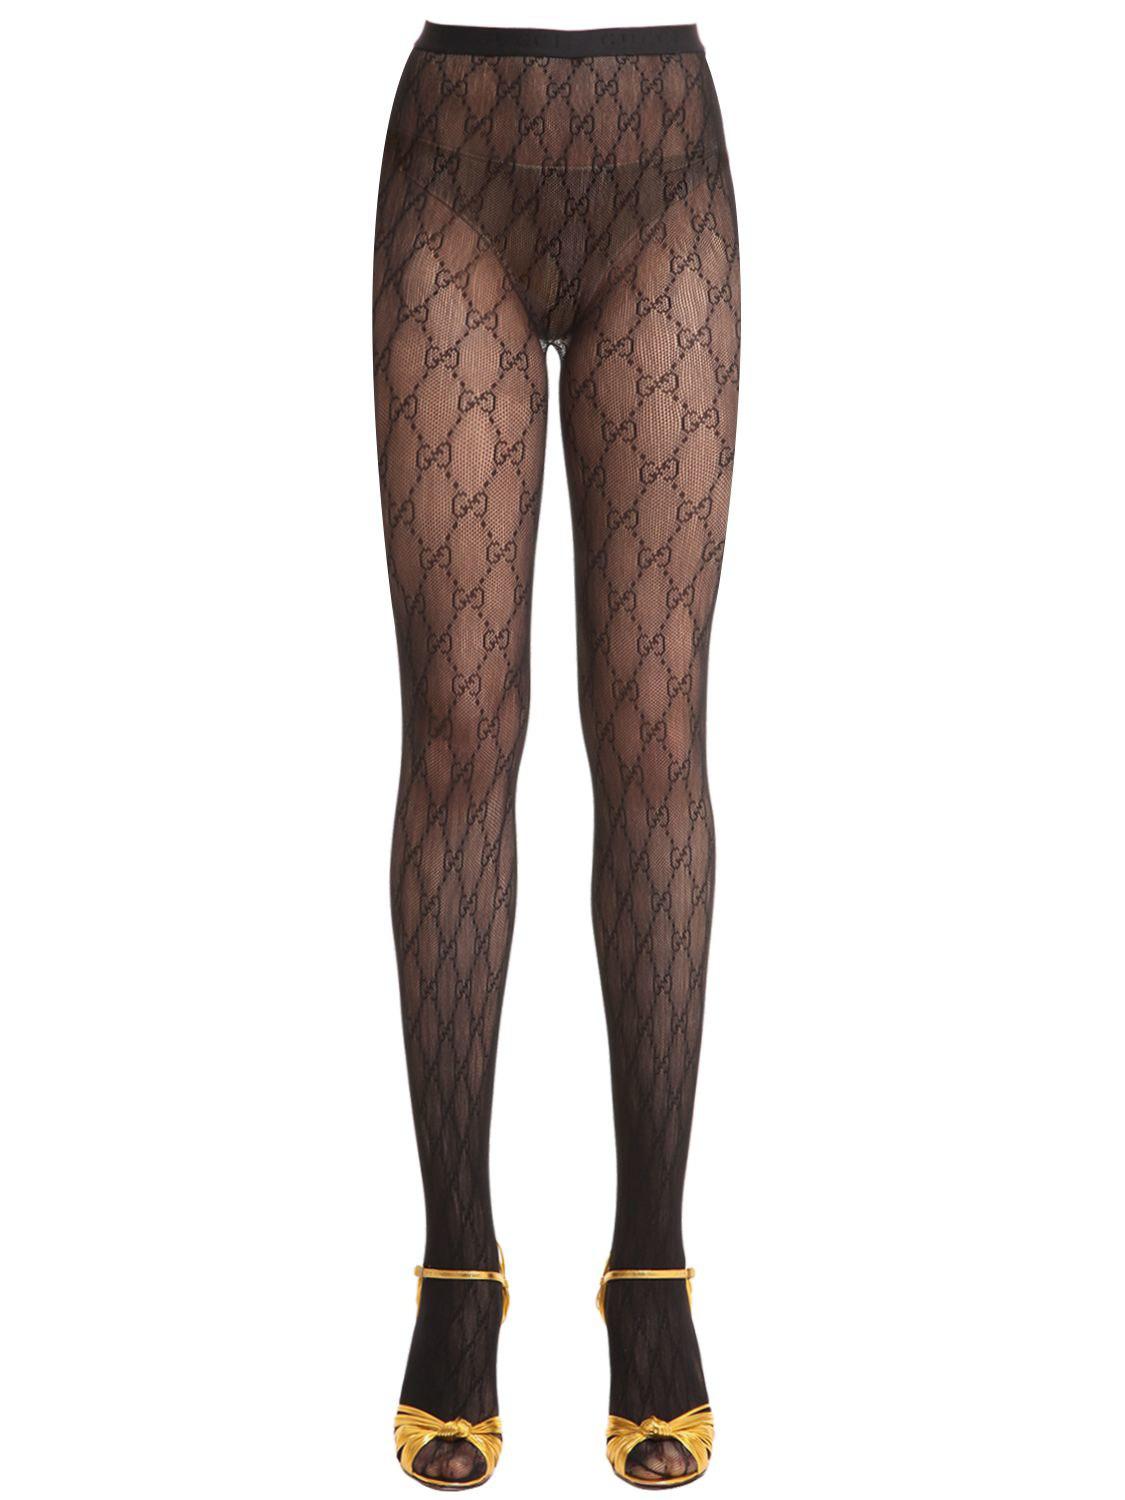 Gucci Supremelis Gg Stockings in Black - Lyst